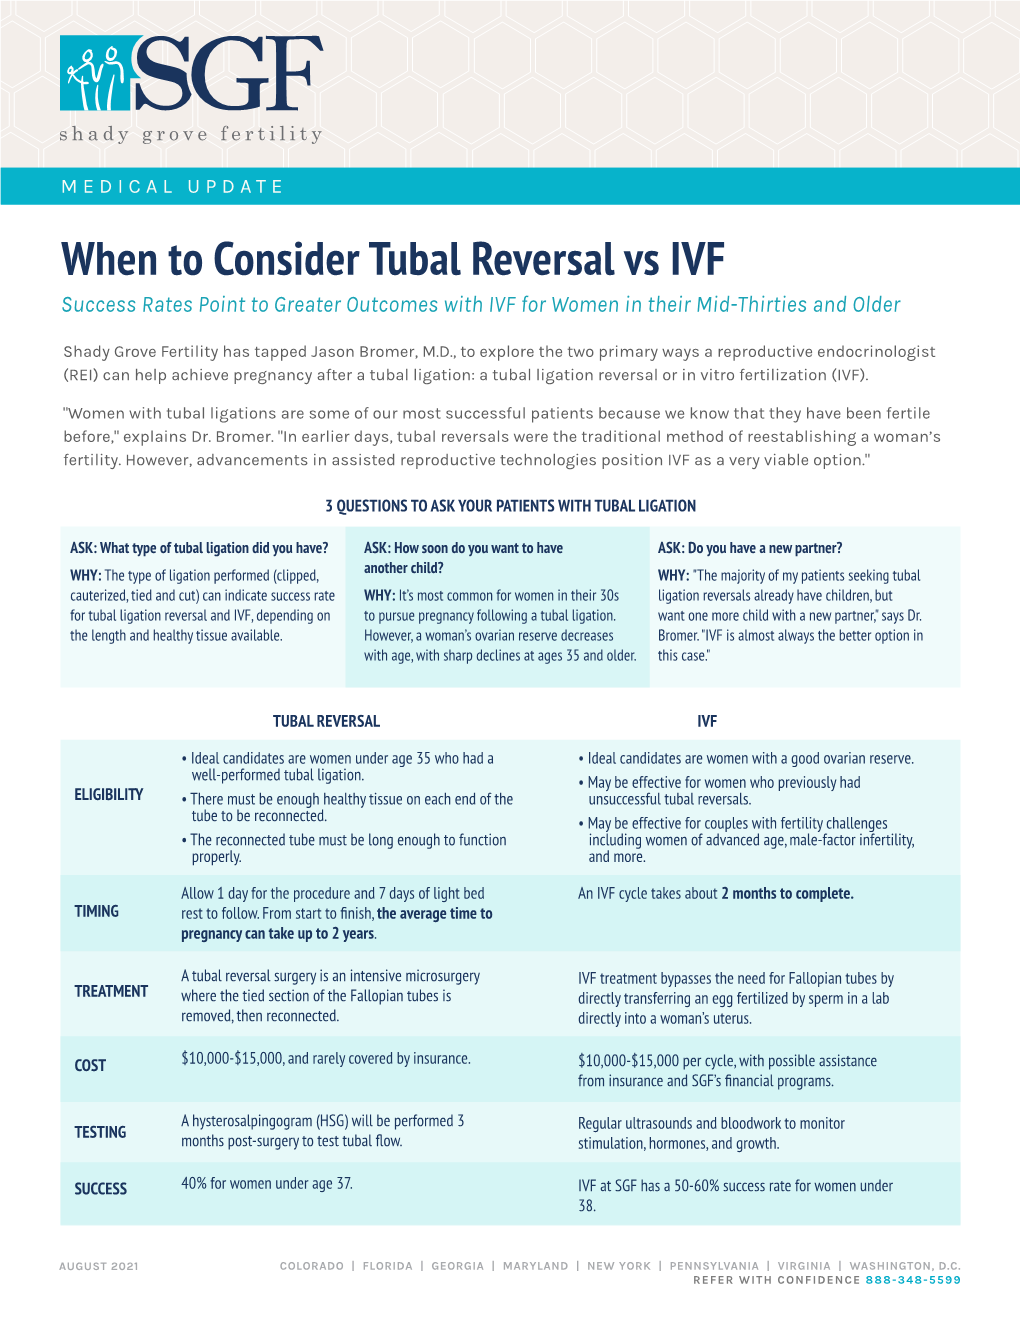 When to Consider Tubal Reversal Vs IVF Success Rates Point to Greater Outcomes with IVF for Women in Their Mid-Thirties and Older